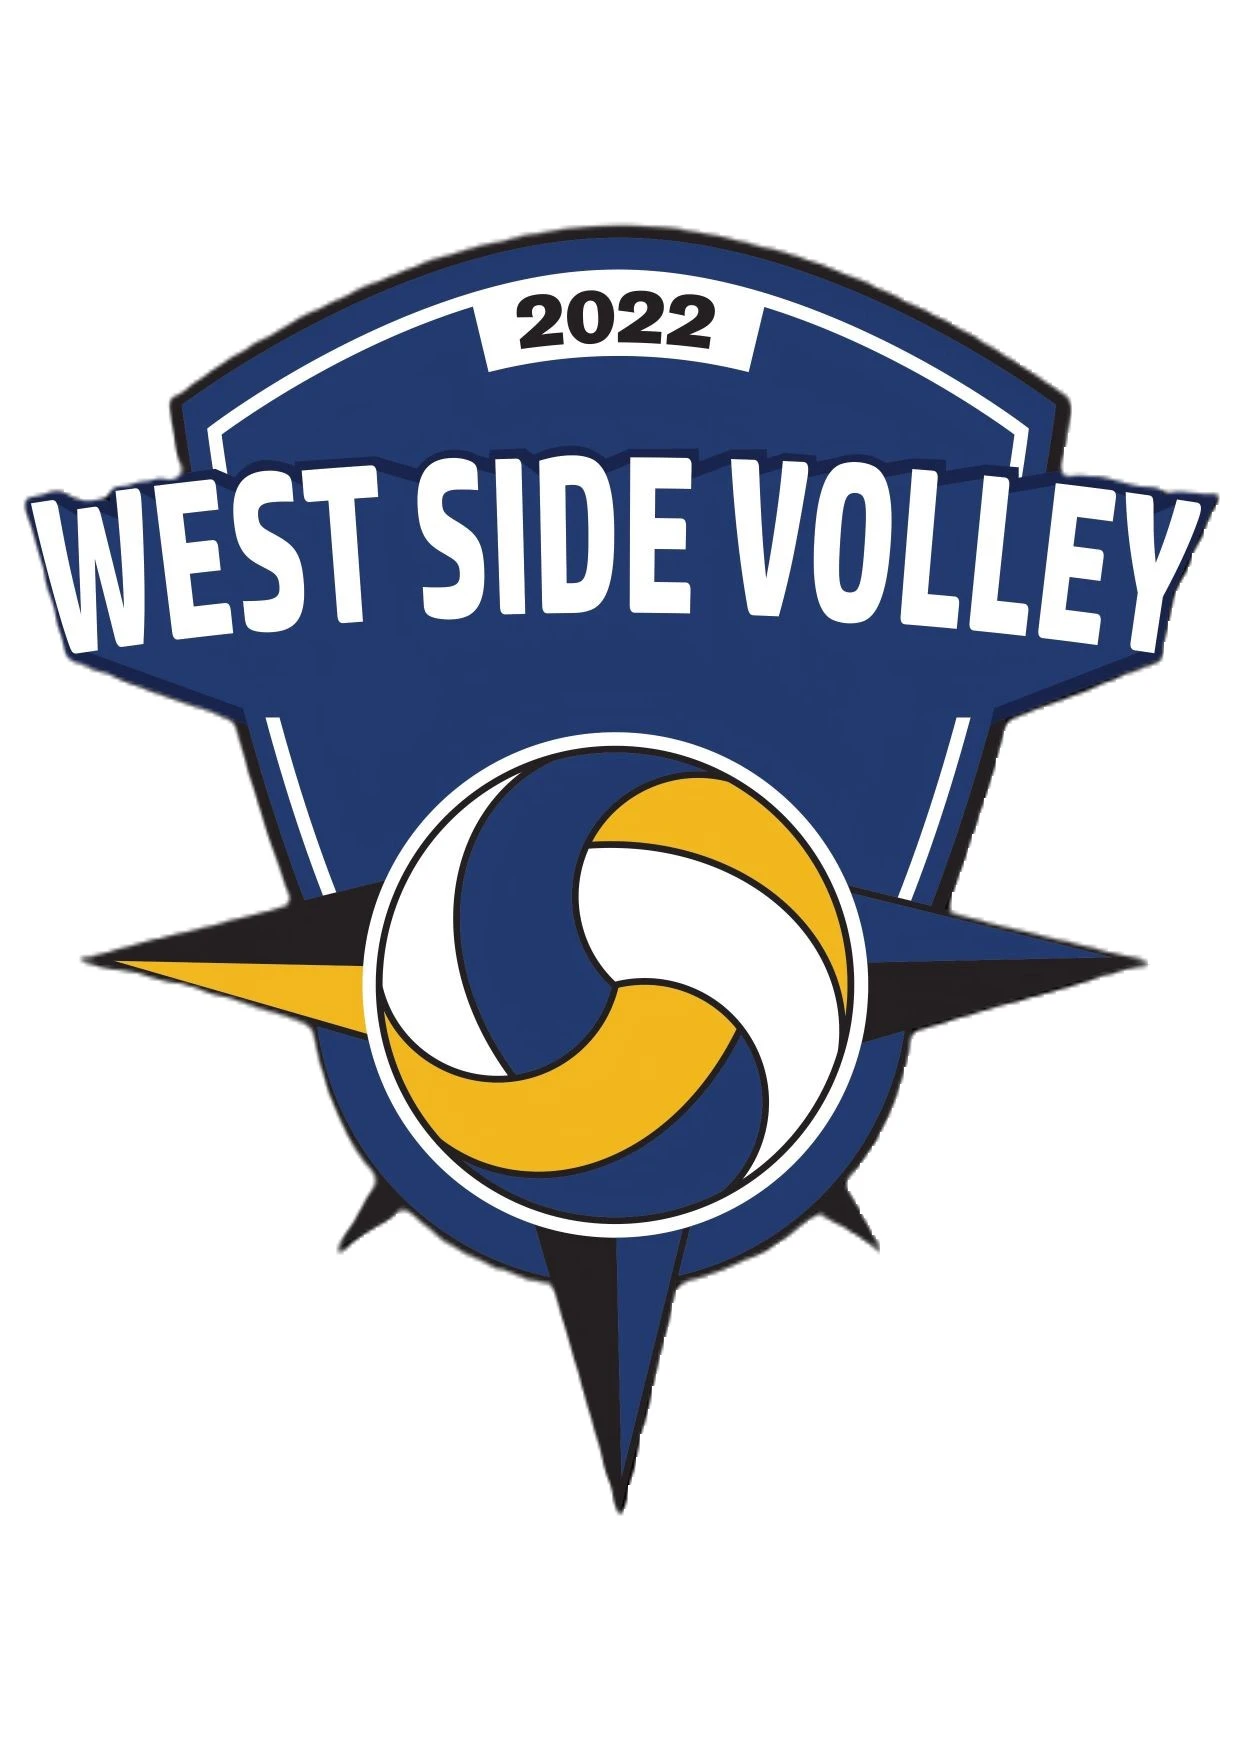 West Side Volley